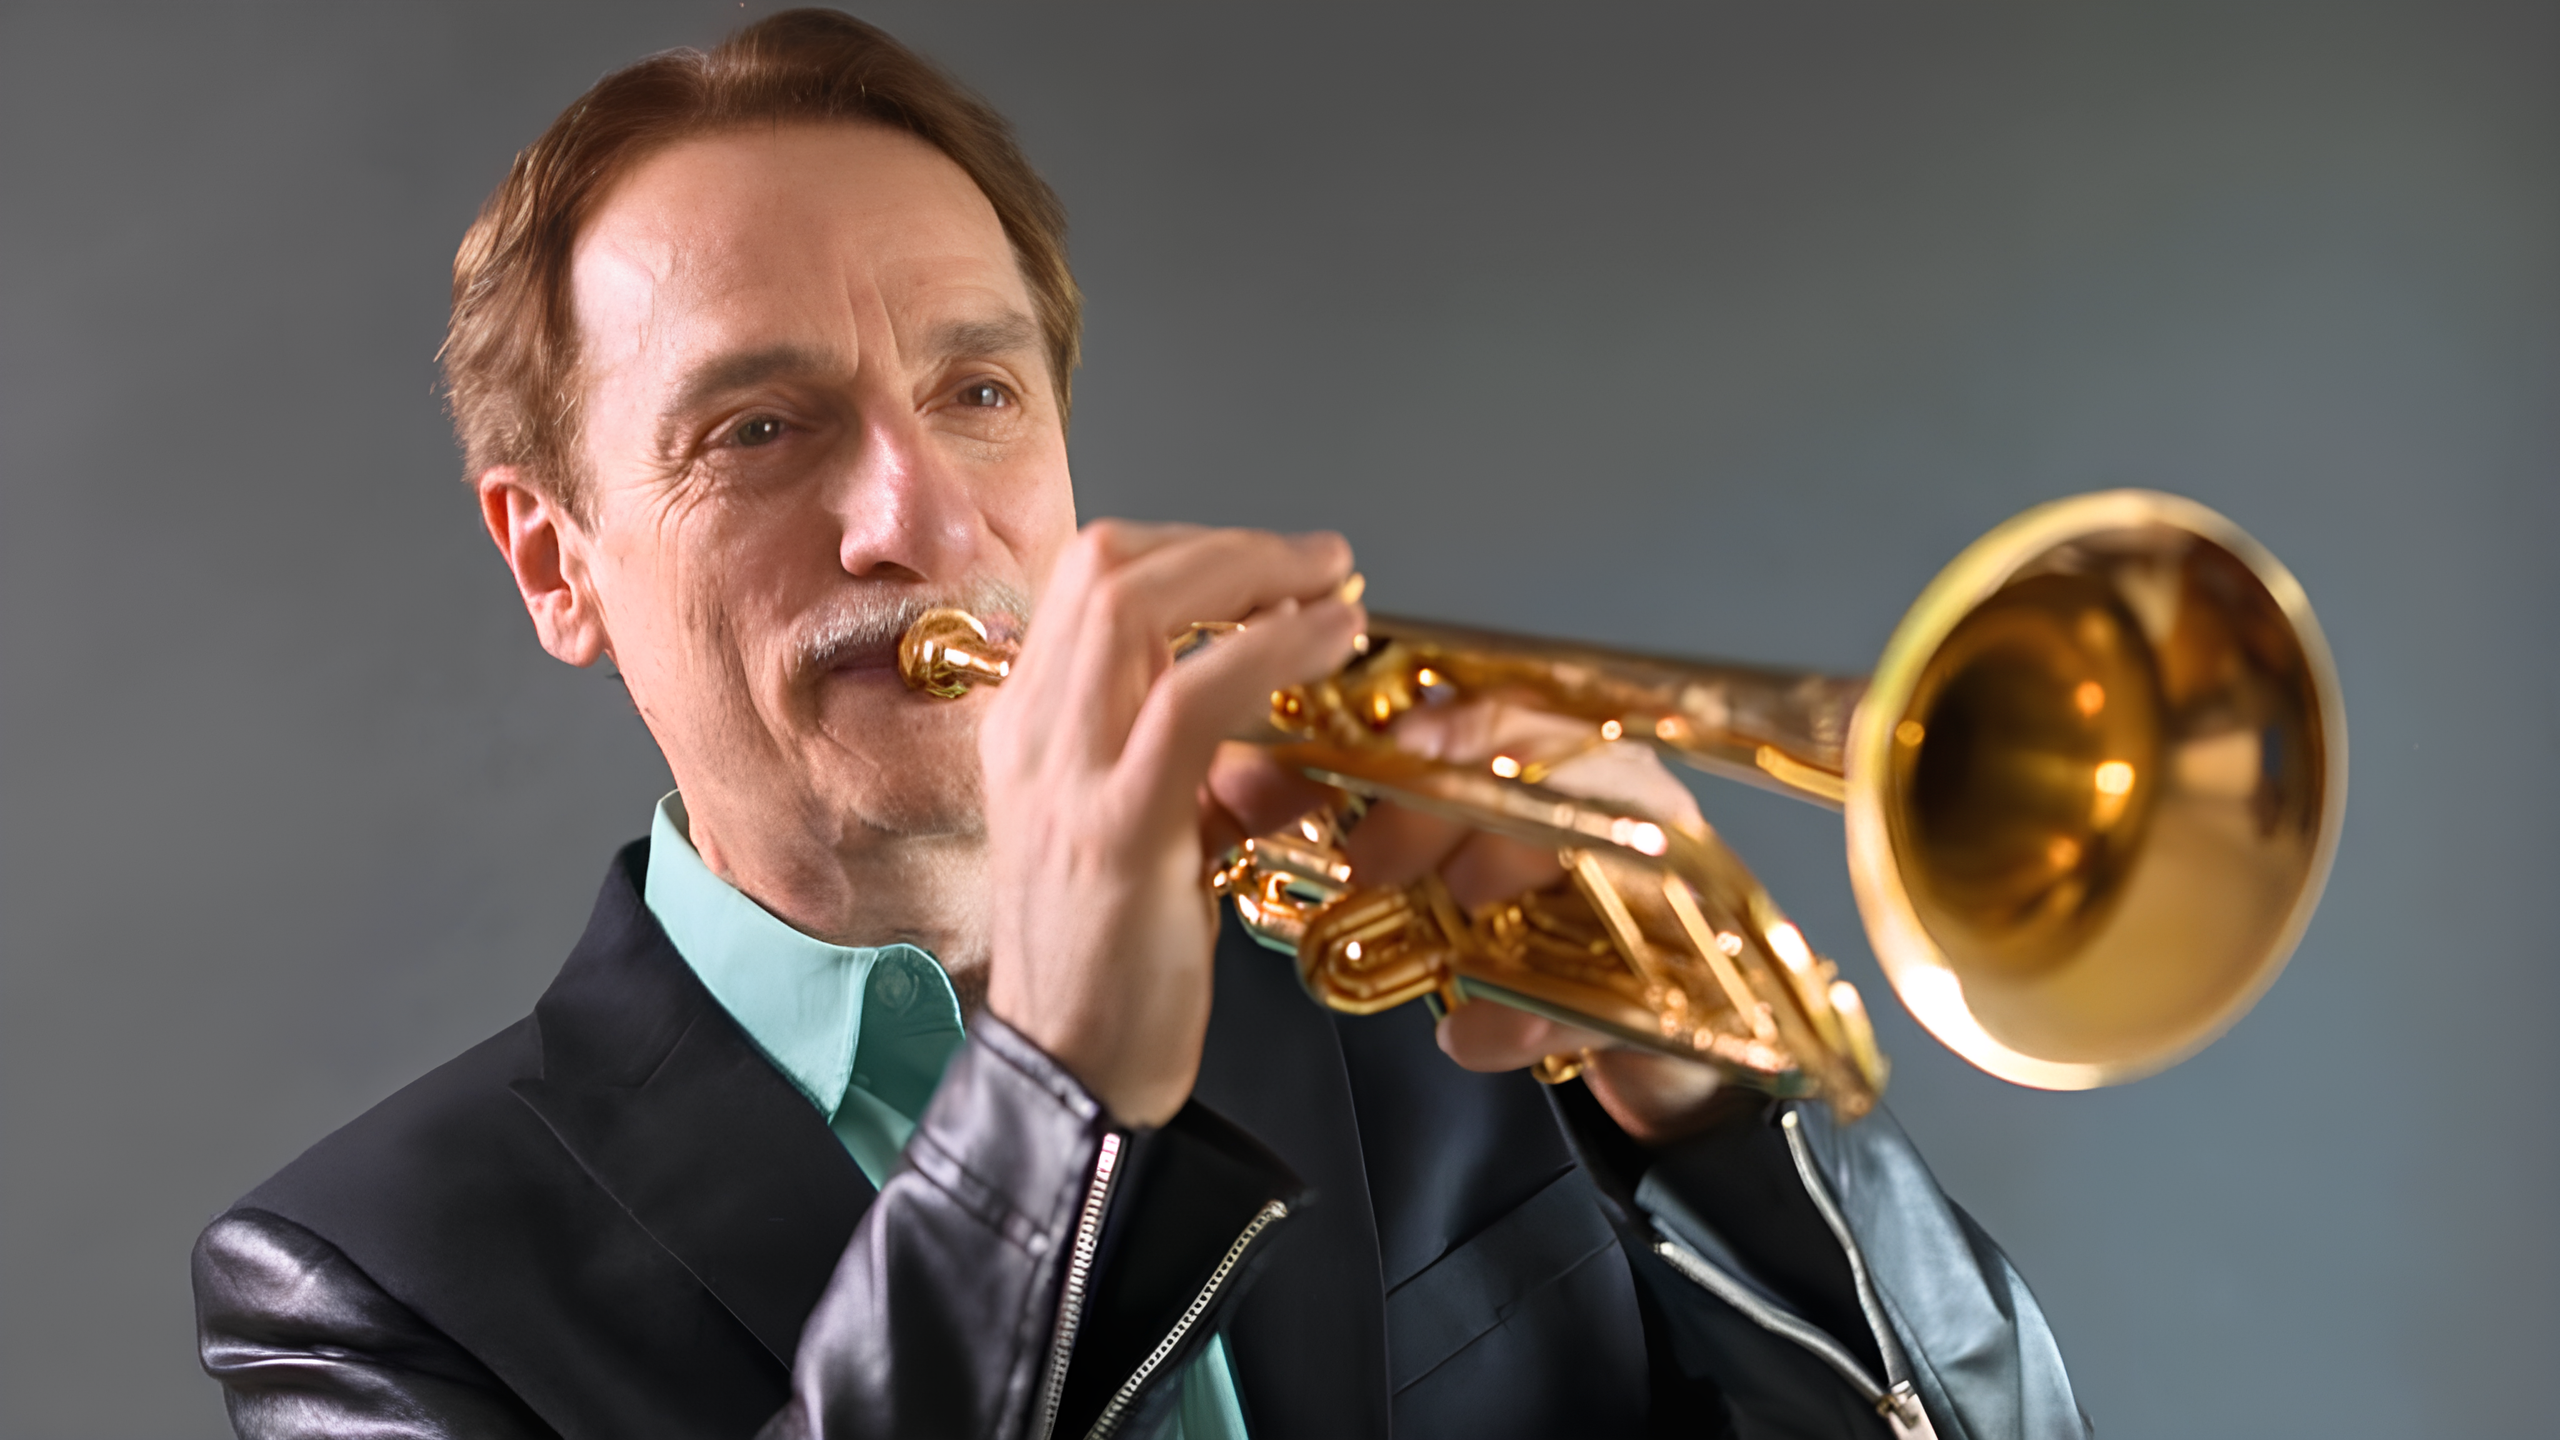 Allen Vizzutti: Brief Biography, Career and His Role in Jazz